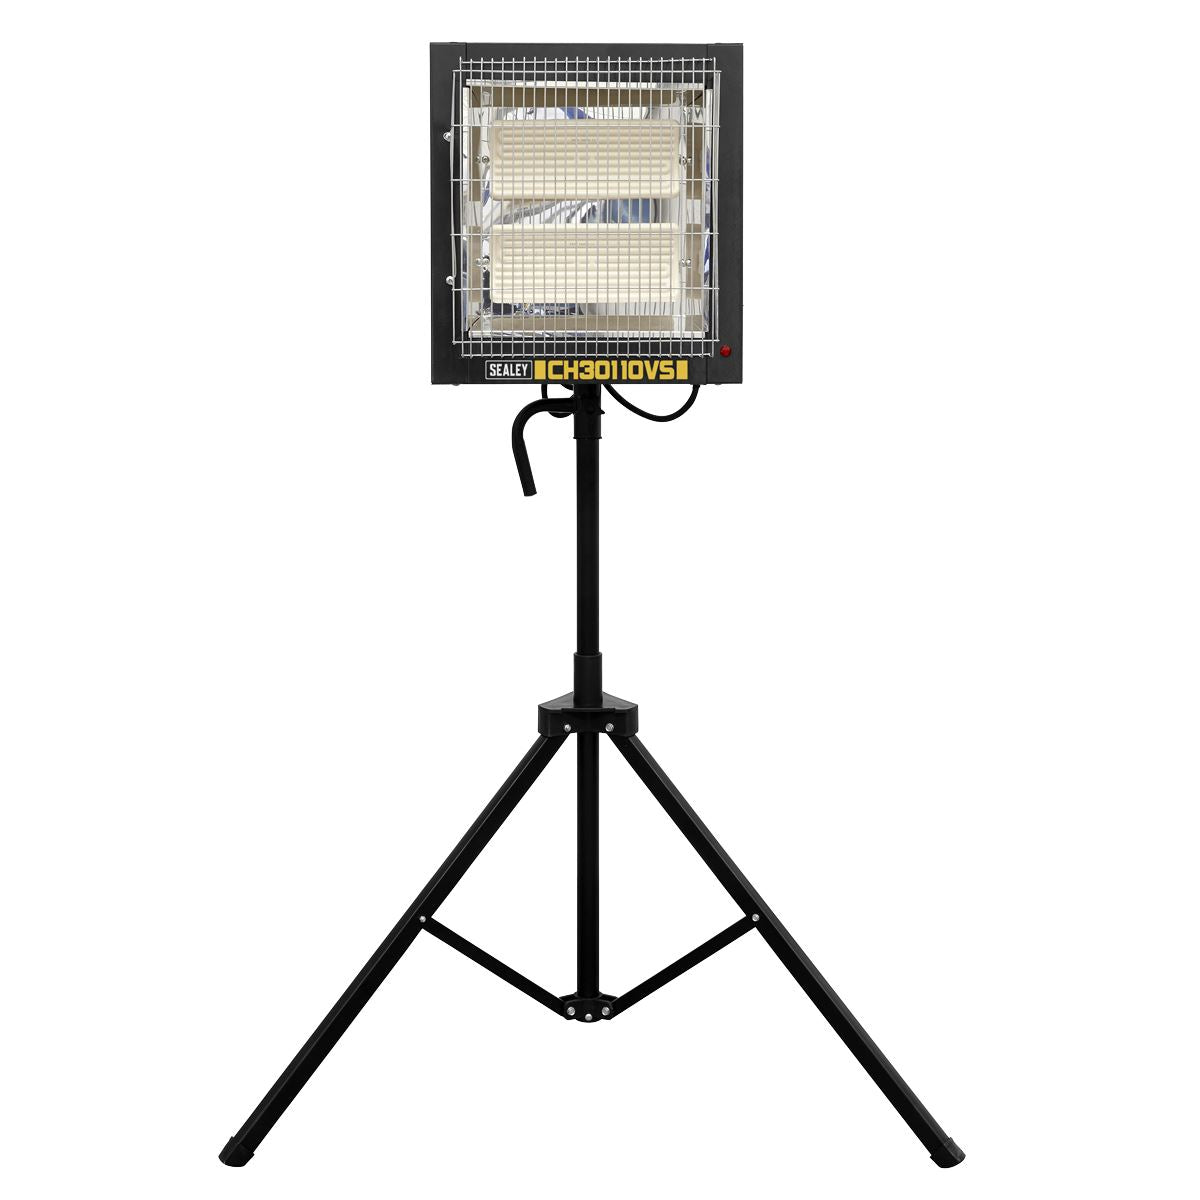 Sealey Ceramic Heater with Tripod Stand 1.2/2.4kW - 110V